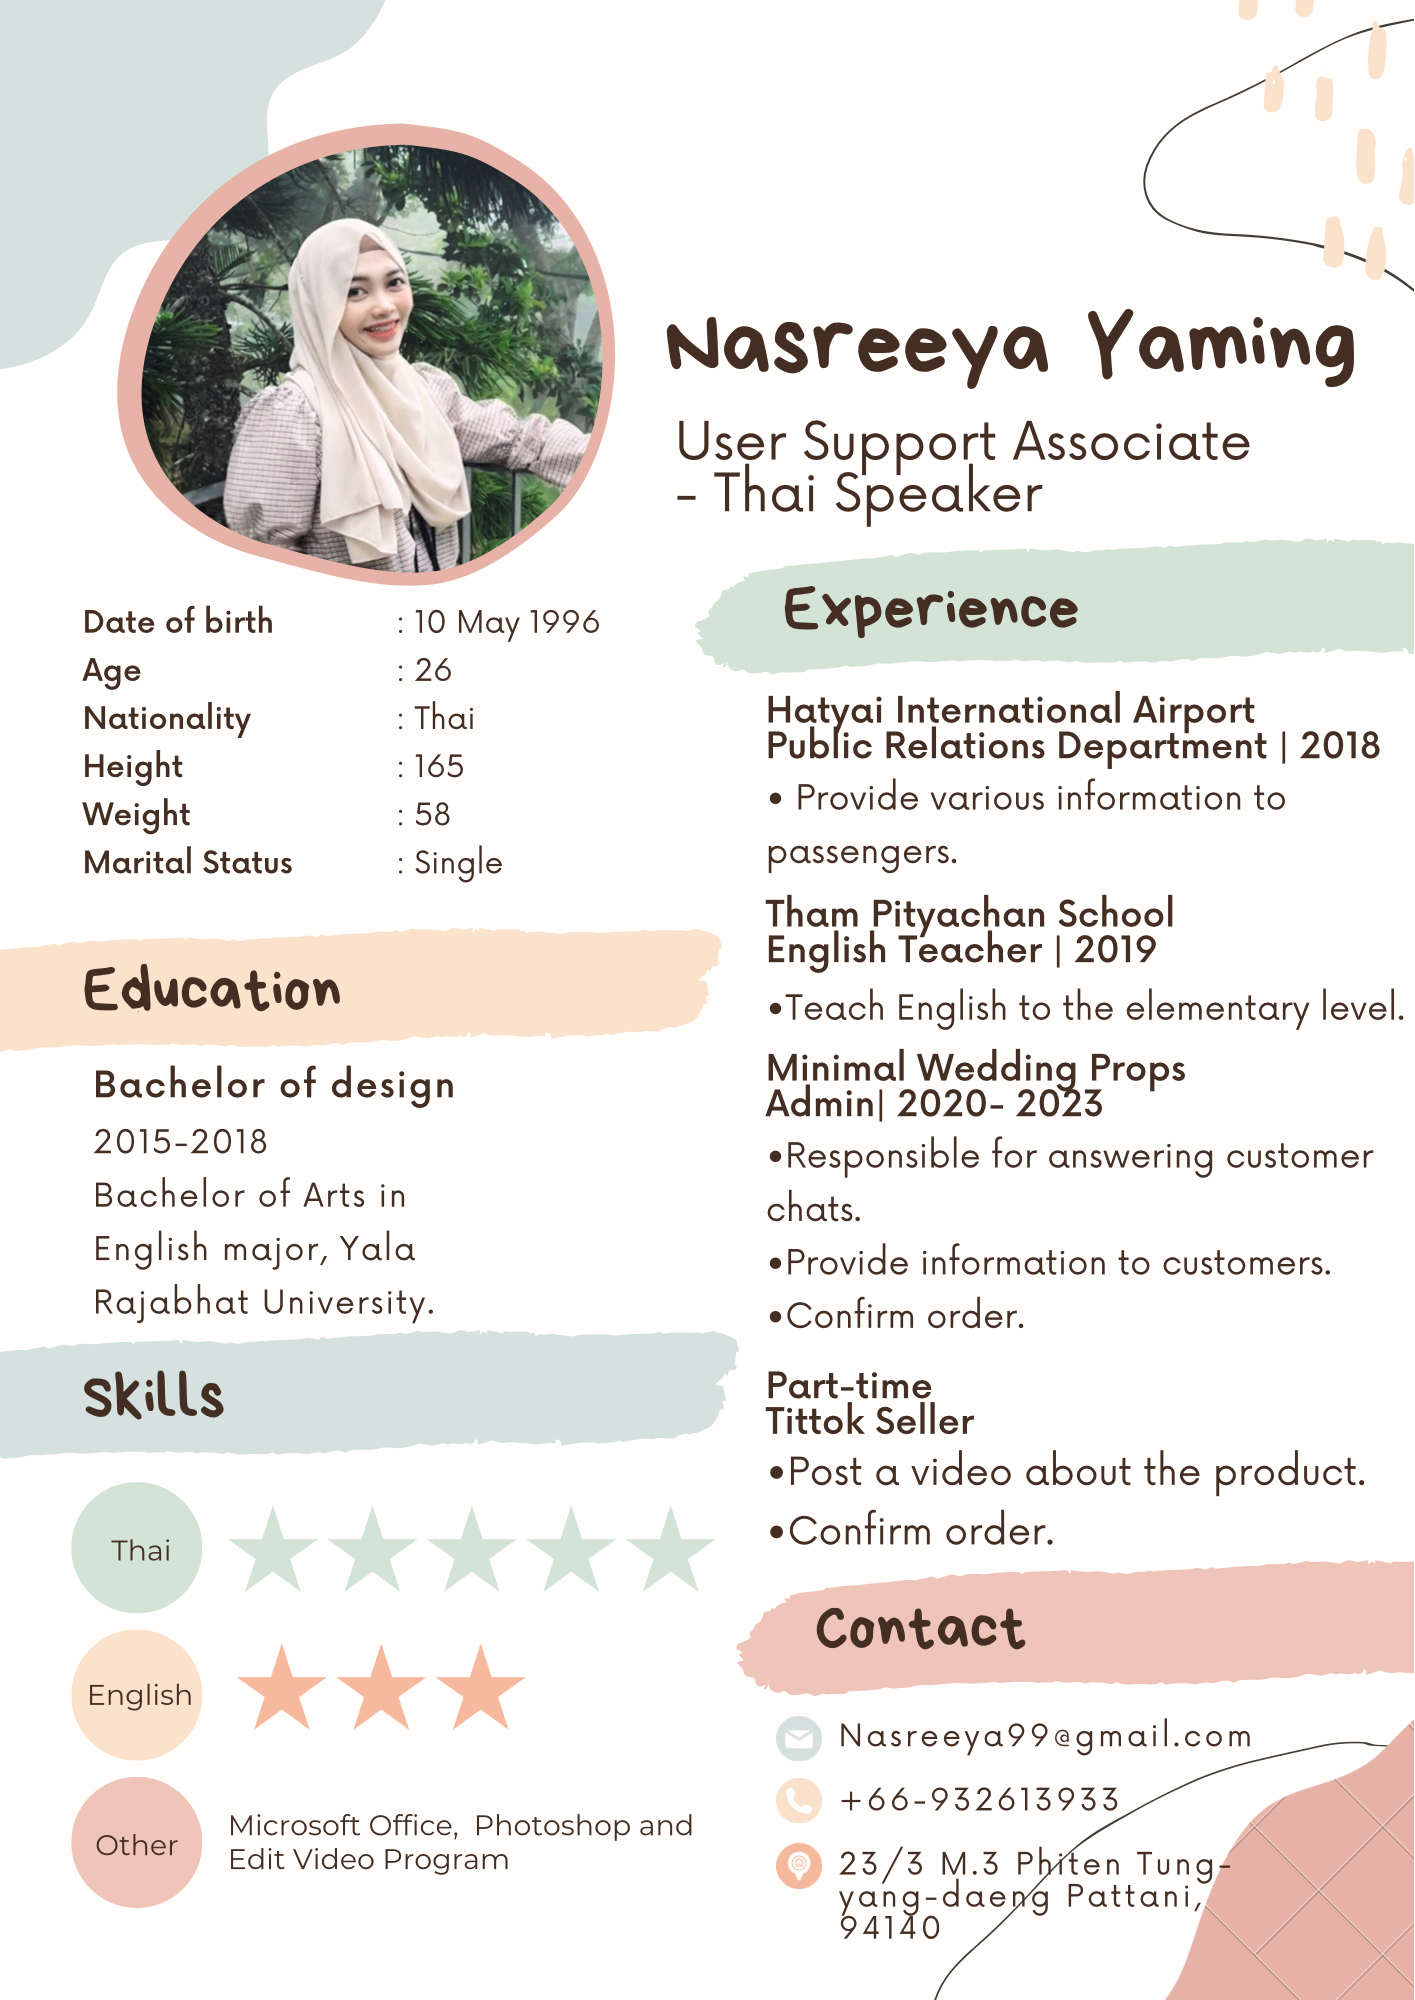 Date of birth 110 May 1996
Age 126
Nationality : Thai

Height 165

Weight : 58

Marital Status : Single

Education

Bachelor of design
2015-2018

Bachelor of Arts in
English major, Yala

Rajabhat University.

skills

English

Microsoft Office, Photoshop and

Other Edit Video Program

—

~

Nasreeya Yaming

User Support Associate
- Thai Speaker

Experience

eg International Airport
Public Relations Department | 2018

e Provide various information to
passengers.

Tham Pityachan School
English Teacher | 2019

eTeach English to the elementary level.

Minimal Wedding Props
Admin| 2020- 2023

*Responsible for answering customer
chats.

Provide information to customers.
«Confirm order.

Part-time

Tittok Seller

Post a video about the product.

«Confirm order.
Contact

Nasreeya99egmail.com —

_—

+66-932613933

23/3 M.3 Phi
yang dae g Pattani,
4140